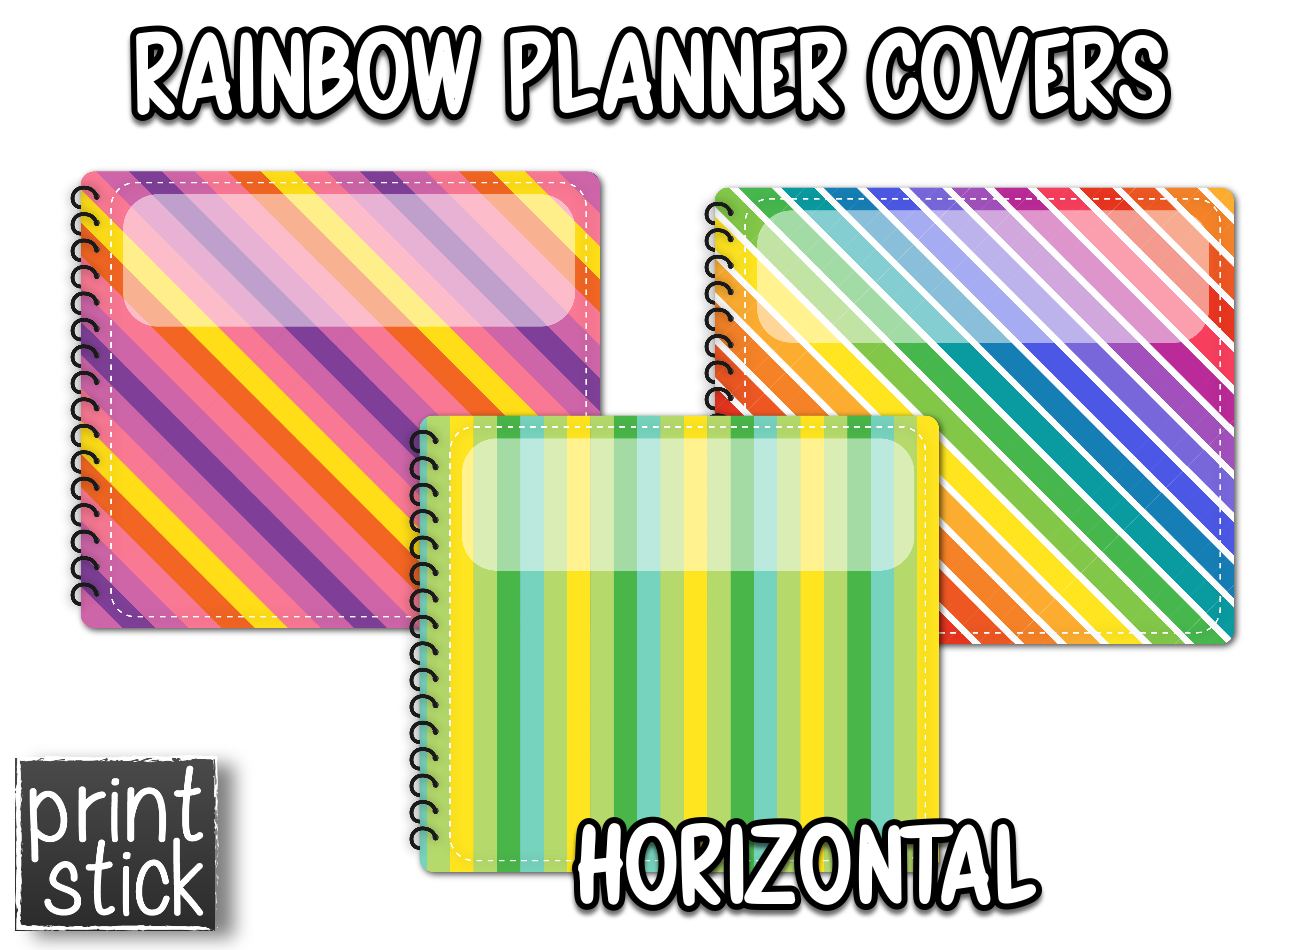 Covers for Planners - Rainbow - Print Stick